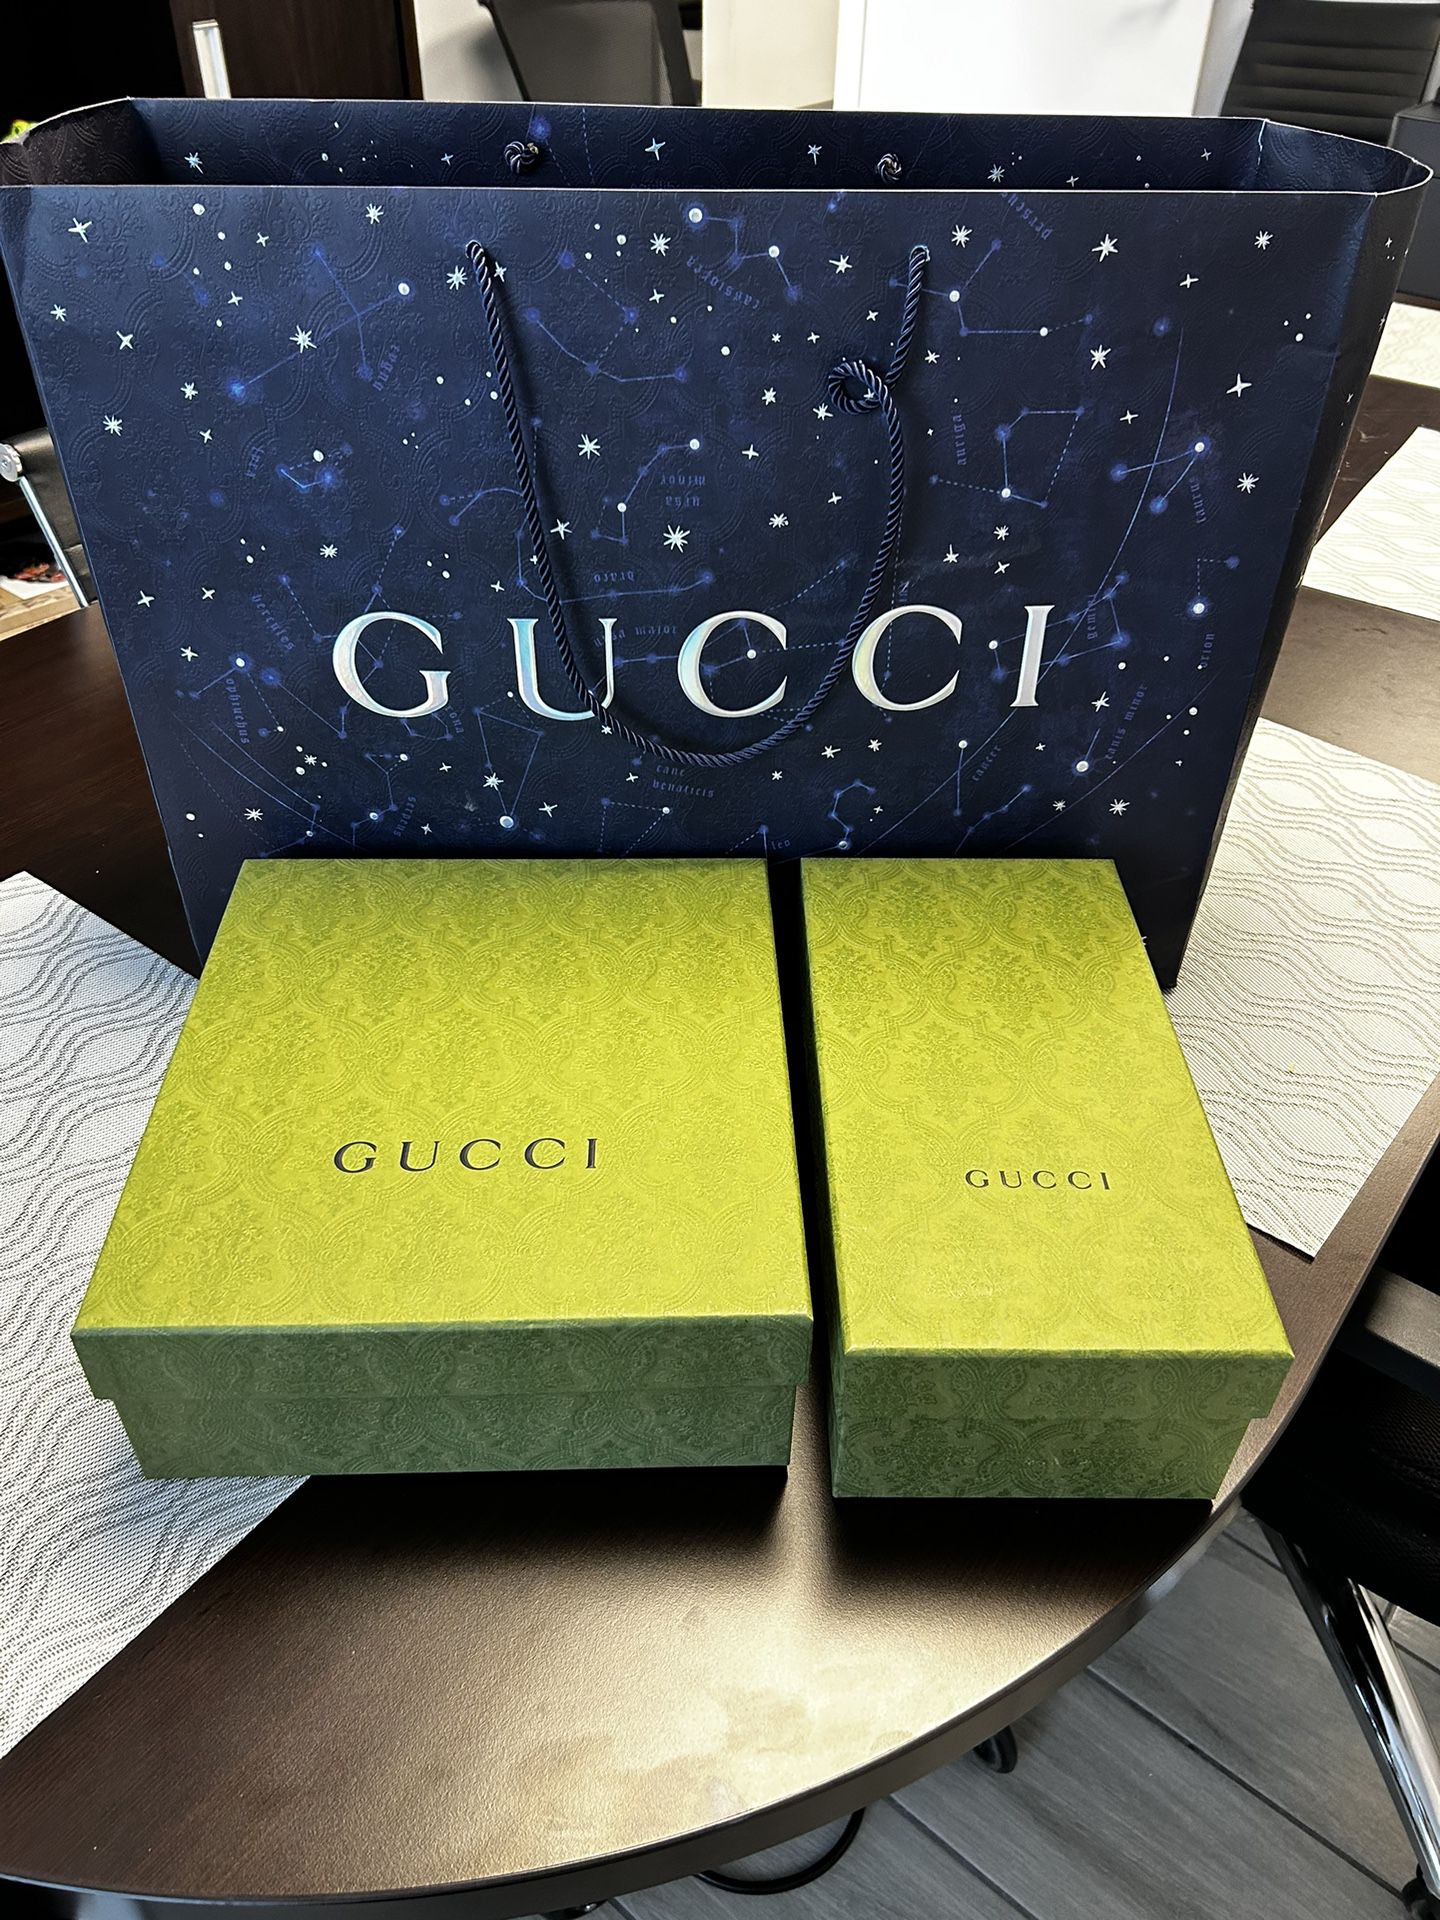 Gucci Bag and Boxes